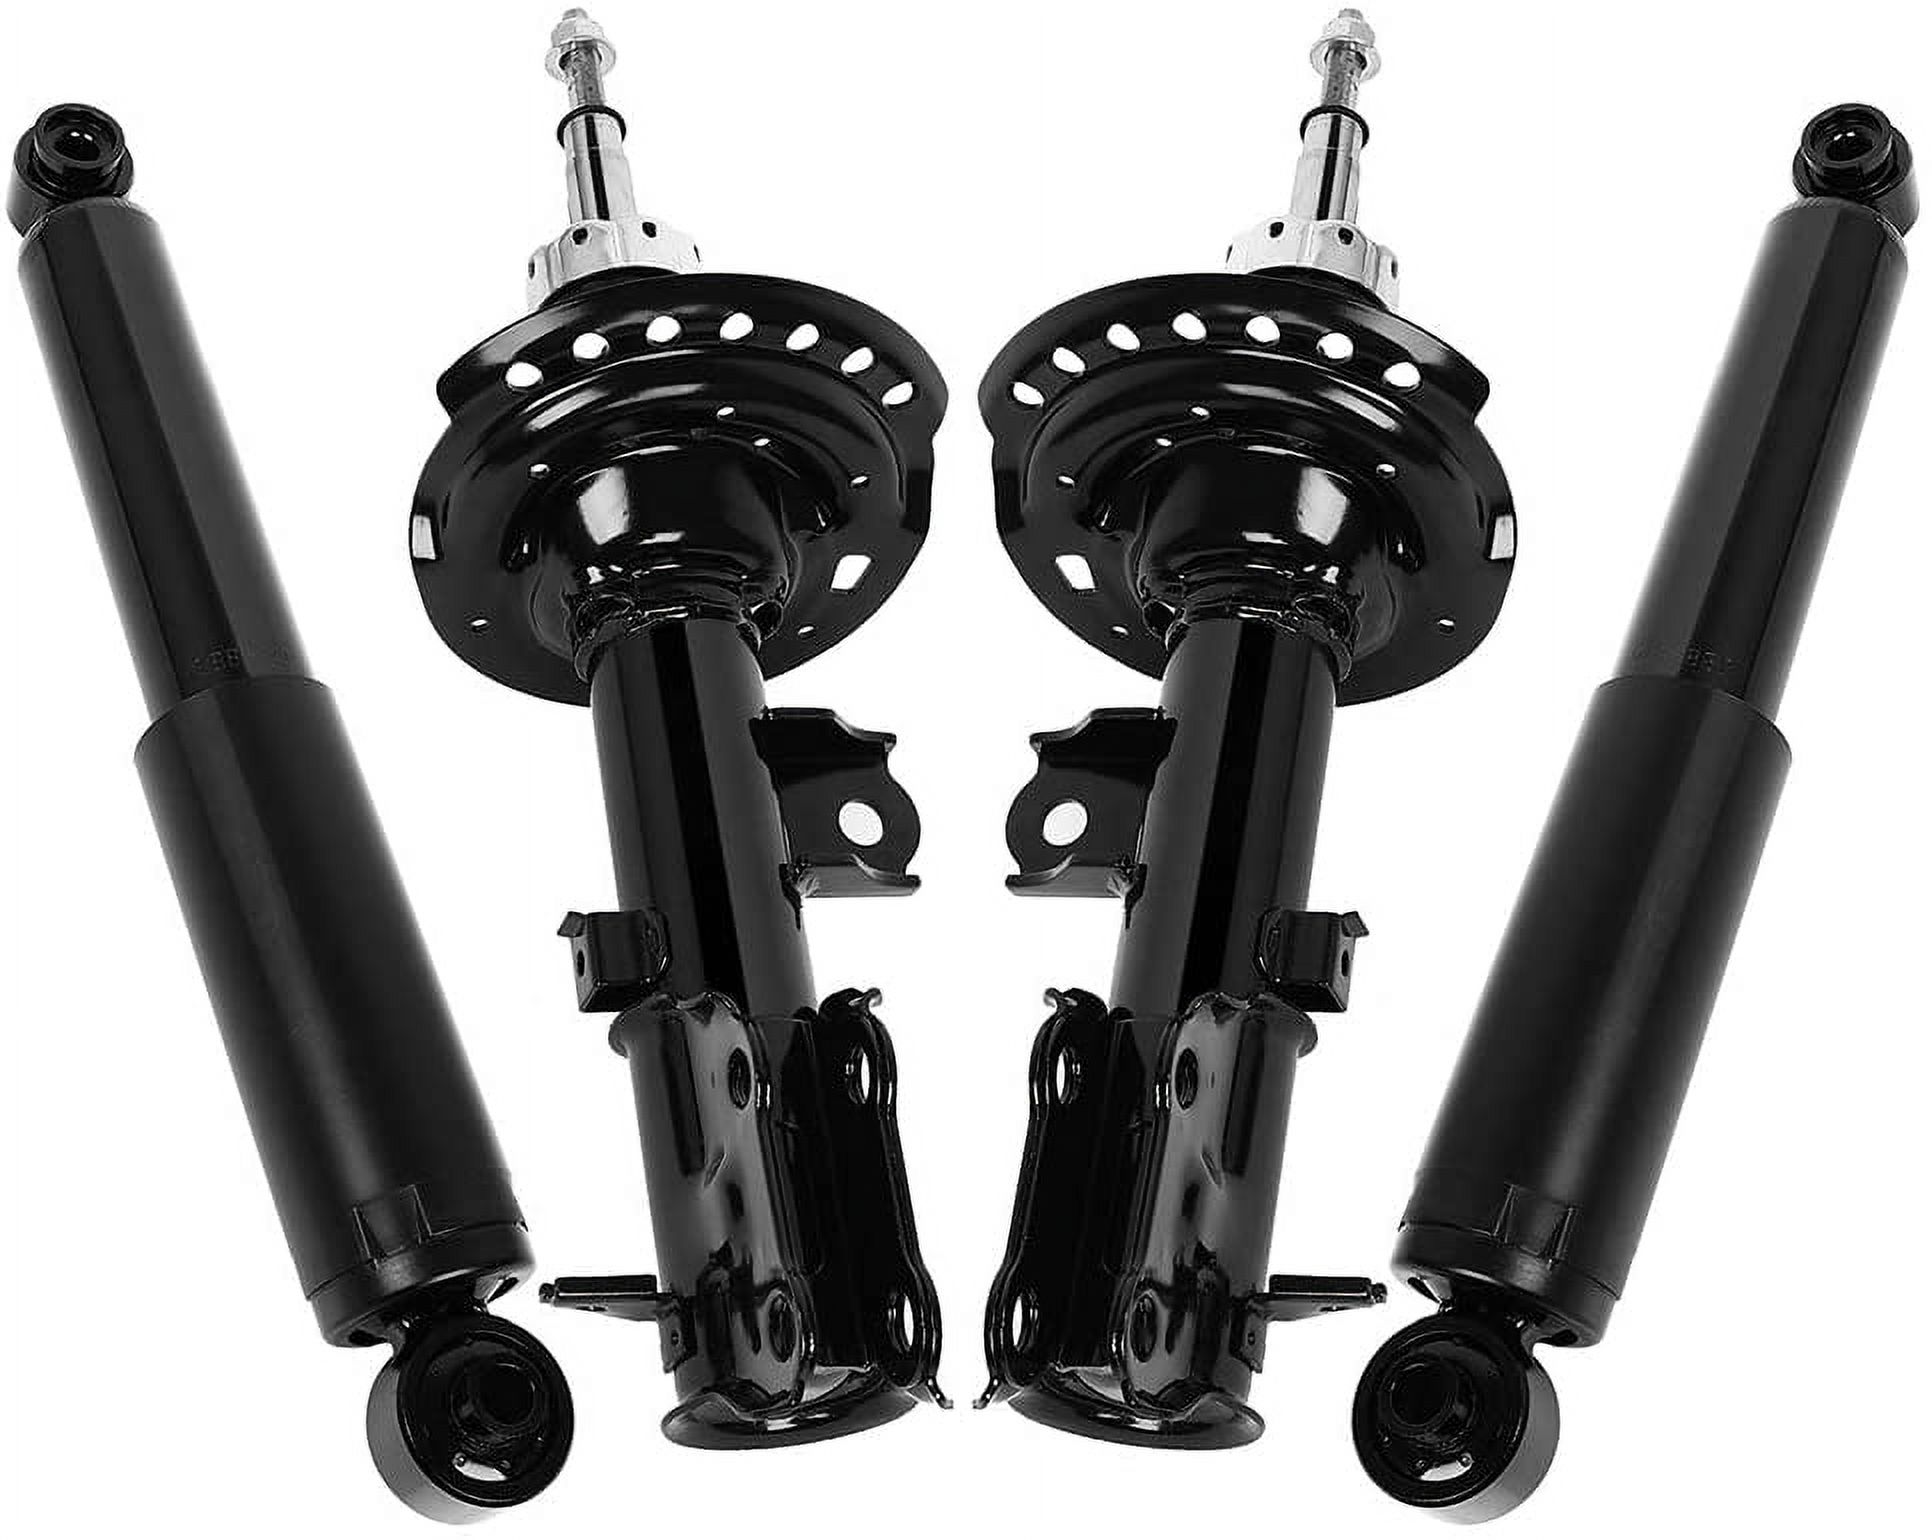 Shocks, ECCPP 4PCS Front Rear Auto Shock Absorber fits 2012 2013 2014 2015 2016 for Hyundai Accent with 338106 72707 338107 72706 5672 - image 1 of 6